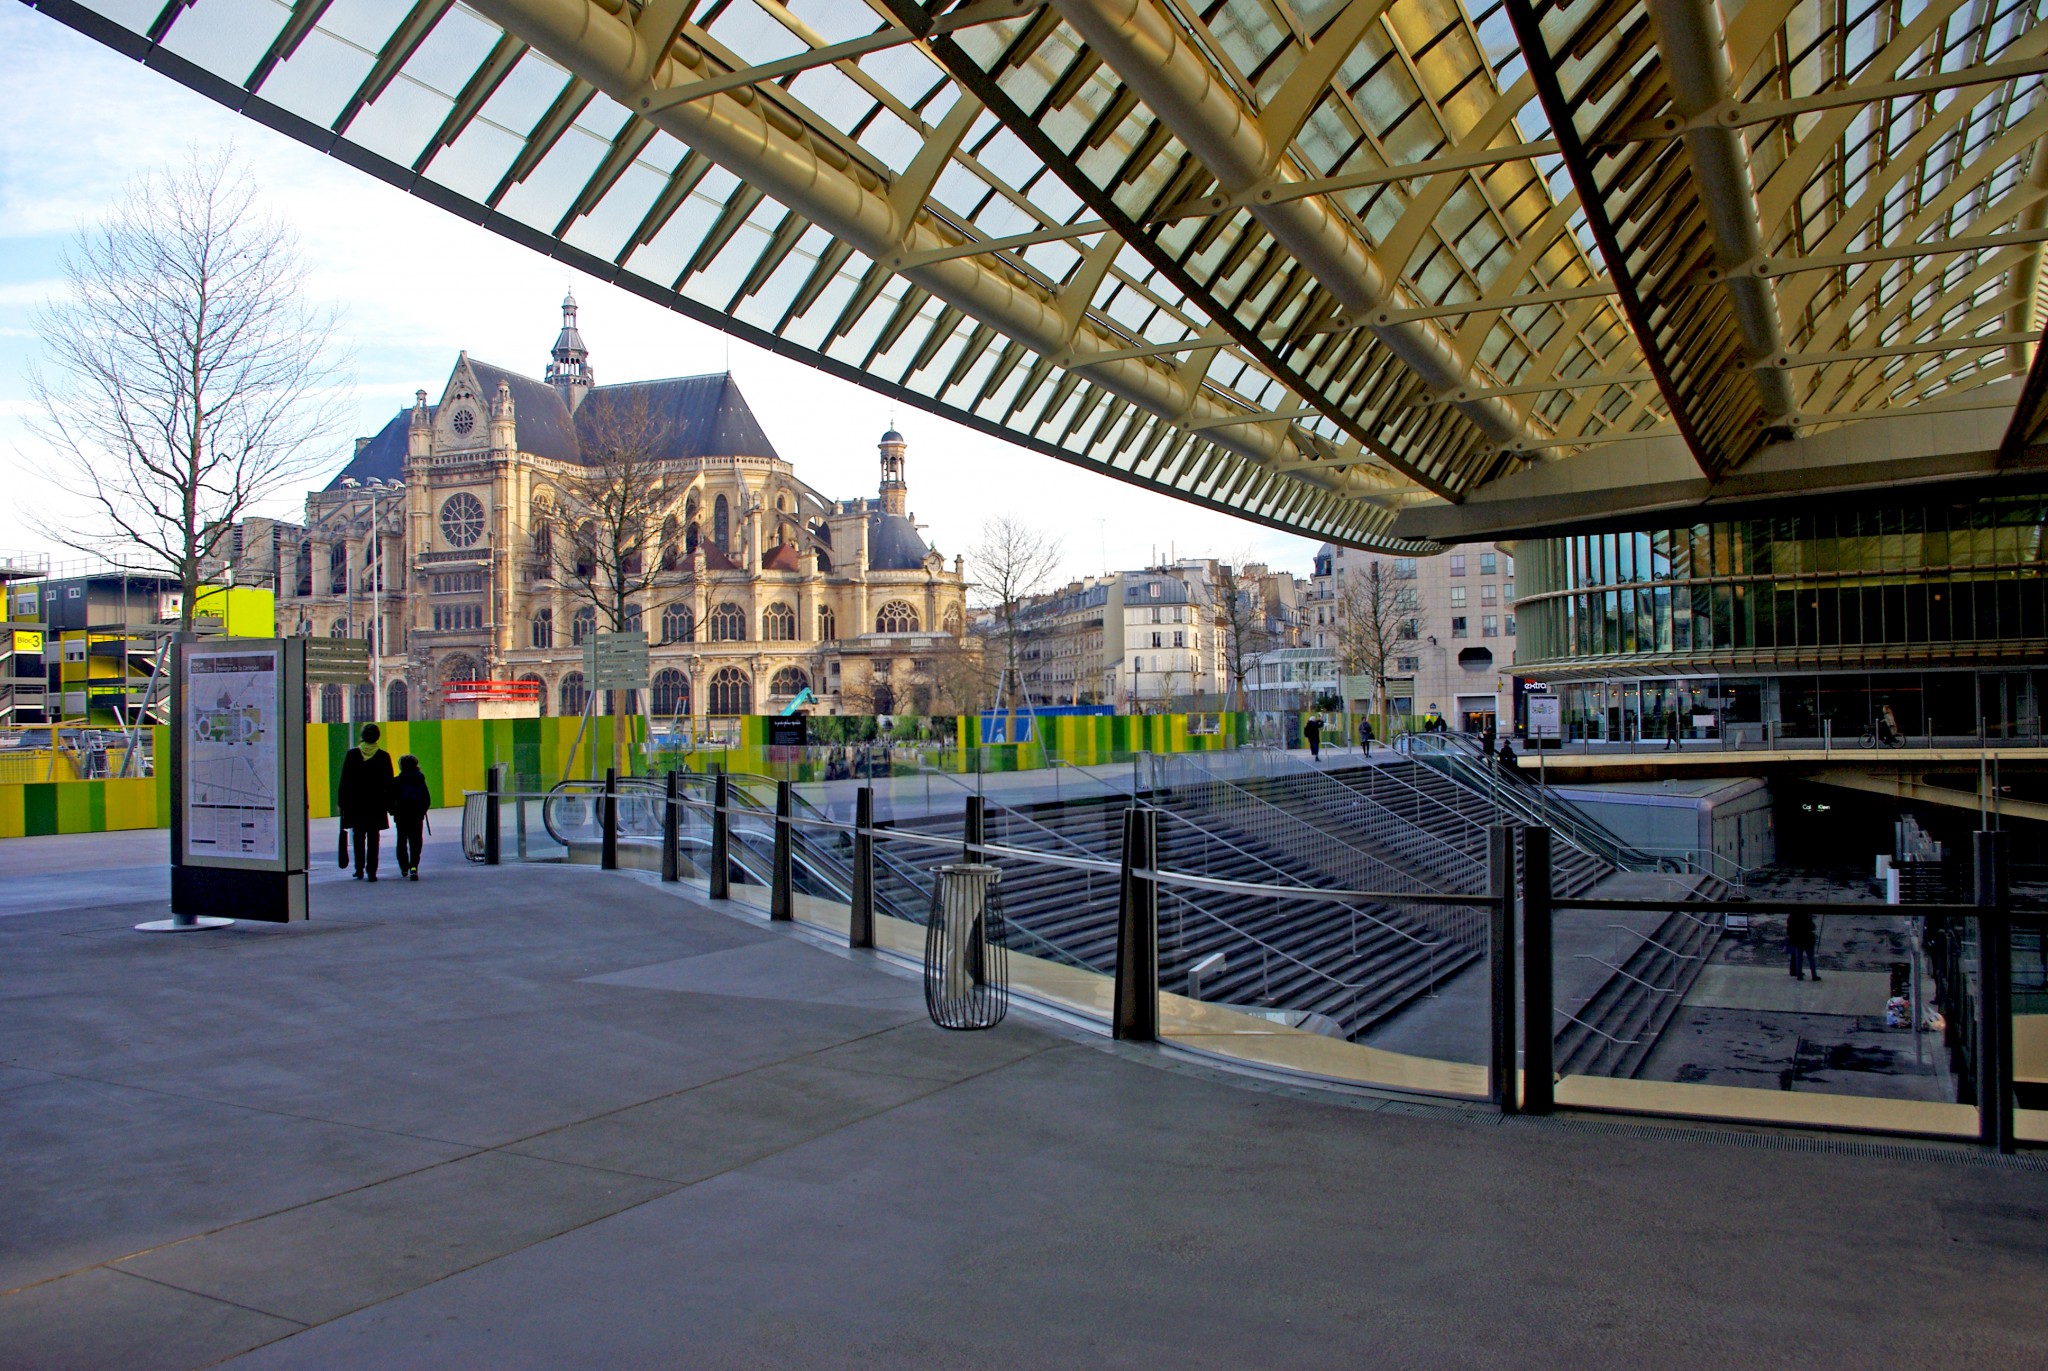 Forum des Halles - the canopy, First Arrondissement © French Moments